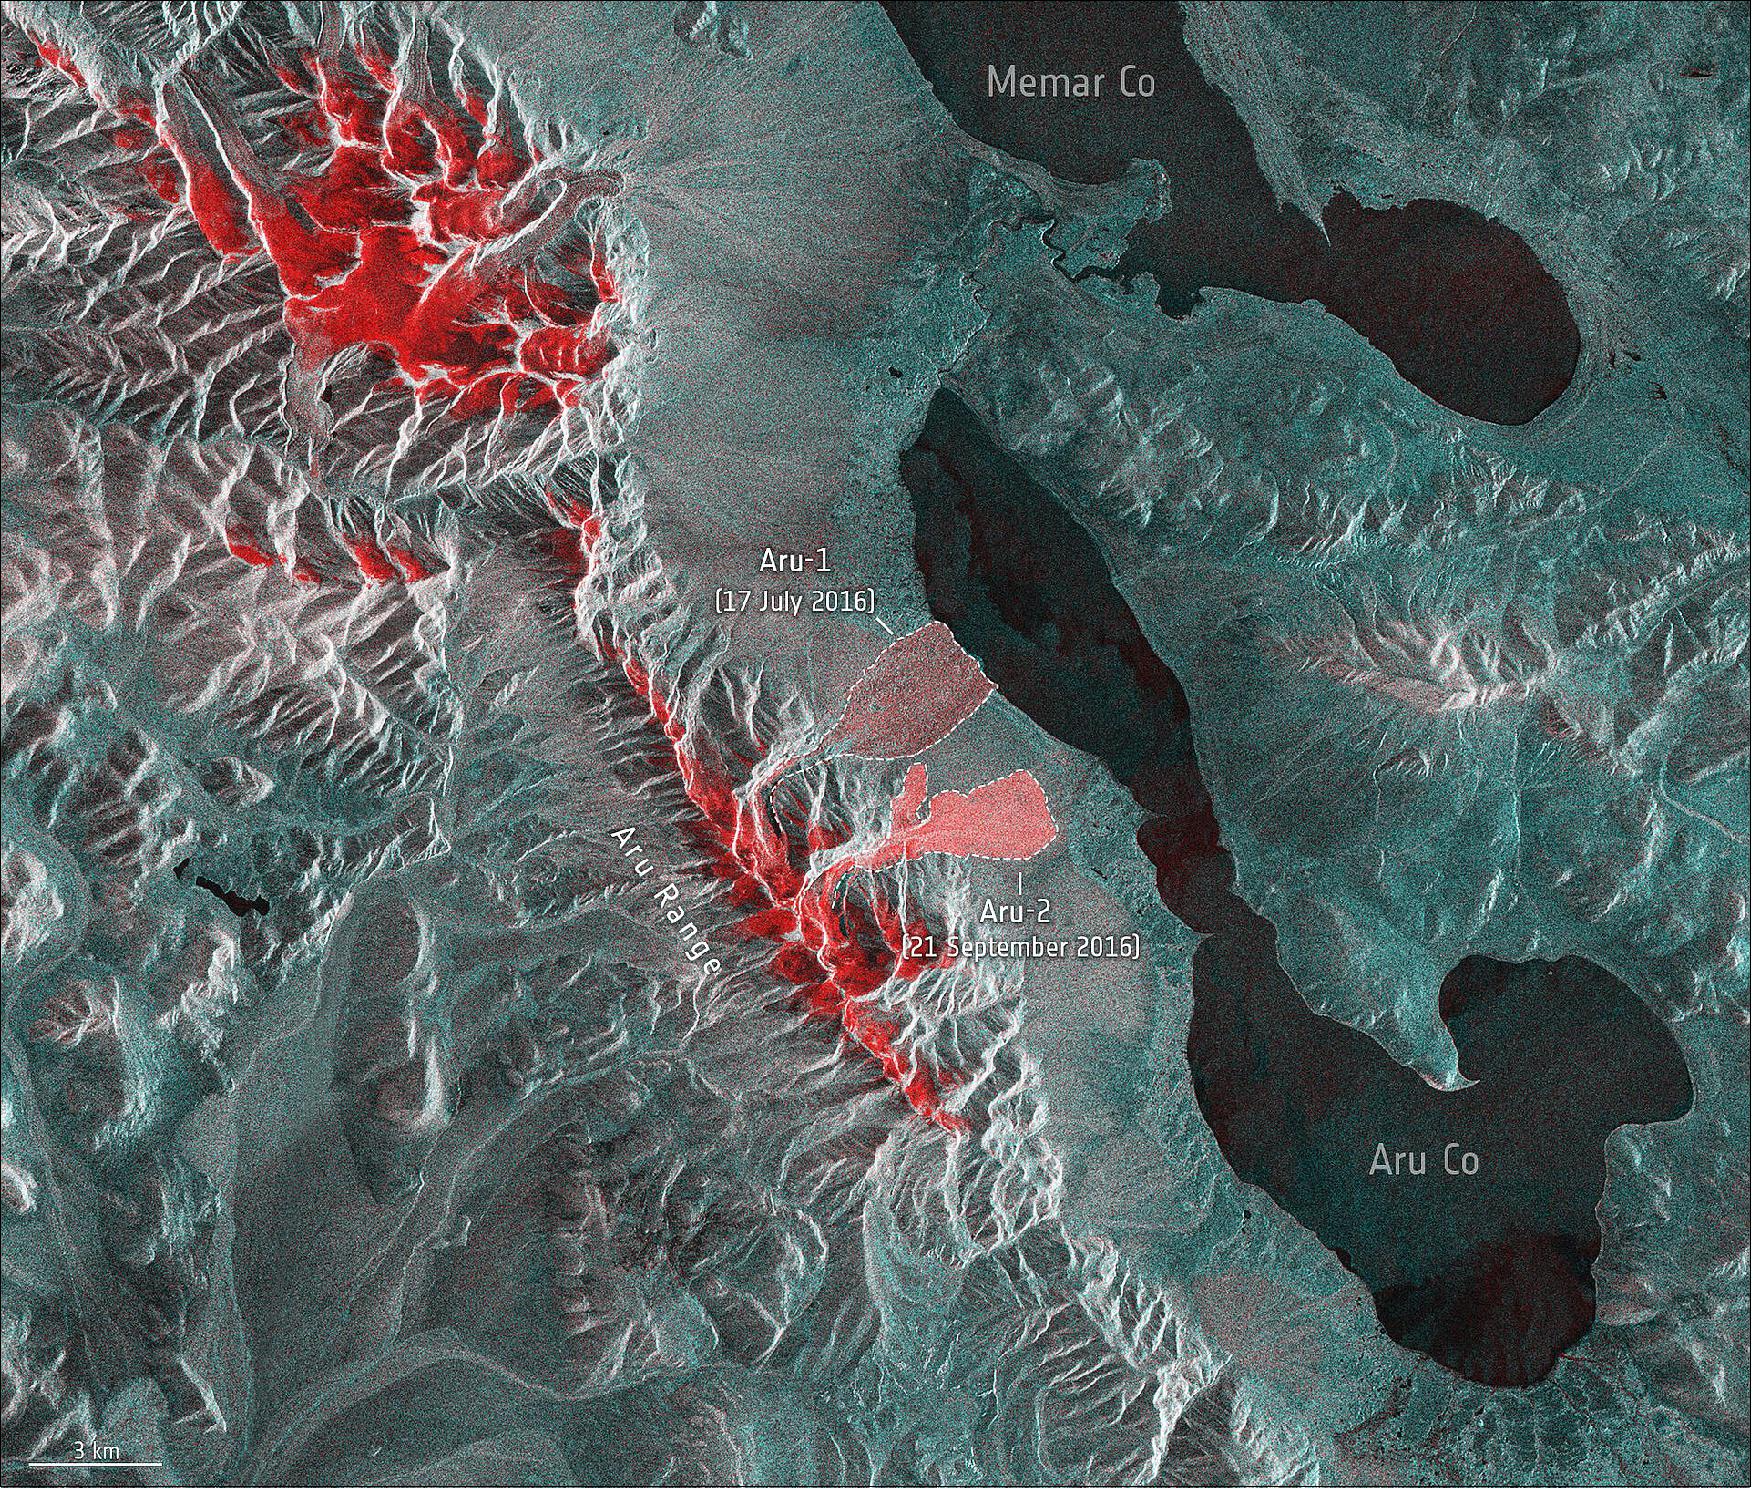 Figure 52: Glacier avalanches in Tibet’s Aru mountain range. In 2016, a glacier in Tibet’s Aru mountain range suddenly collapsed, killing 10 people and hundreds of livestock. A few months later, a second glacier in the same mountain range also unexpectedly collapsed. The image, based on data from the Copernicus Sentinel-1 mission, shows the traces left after these two avalanches. For several years now, scientists have known that glaciers can detach from the mountain rock like this and gush down to the valley at speeds of up to 300 km/hr as a fluid ice-rock avalanche (image credit: ESA, the image contains modified Copernicus Sentinel-2 data (2016), processed by CCI Glacier team and ESA)